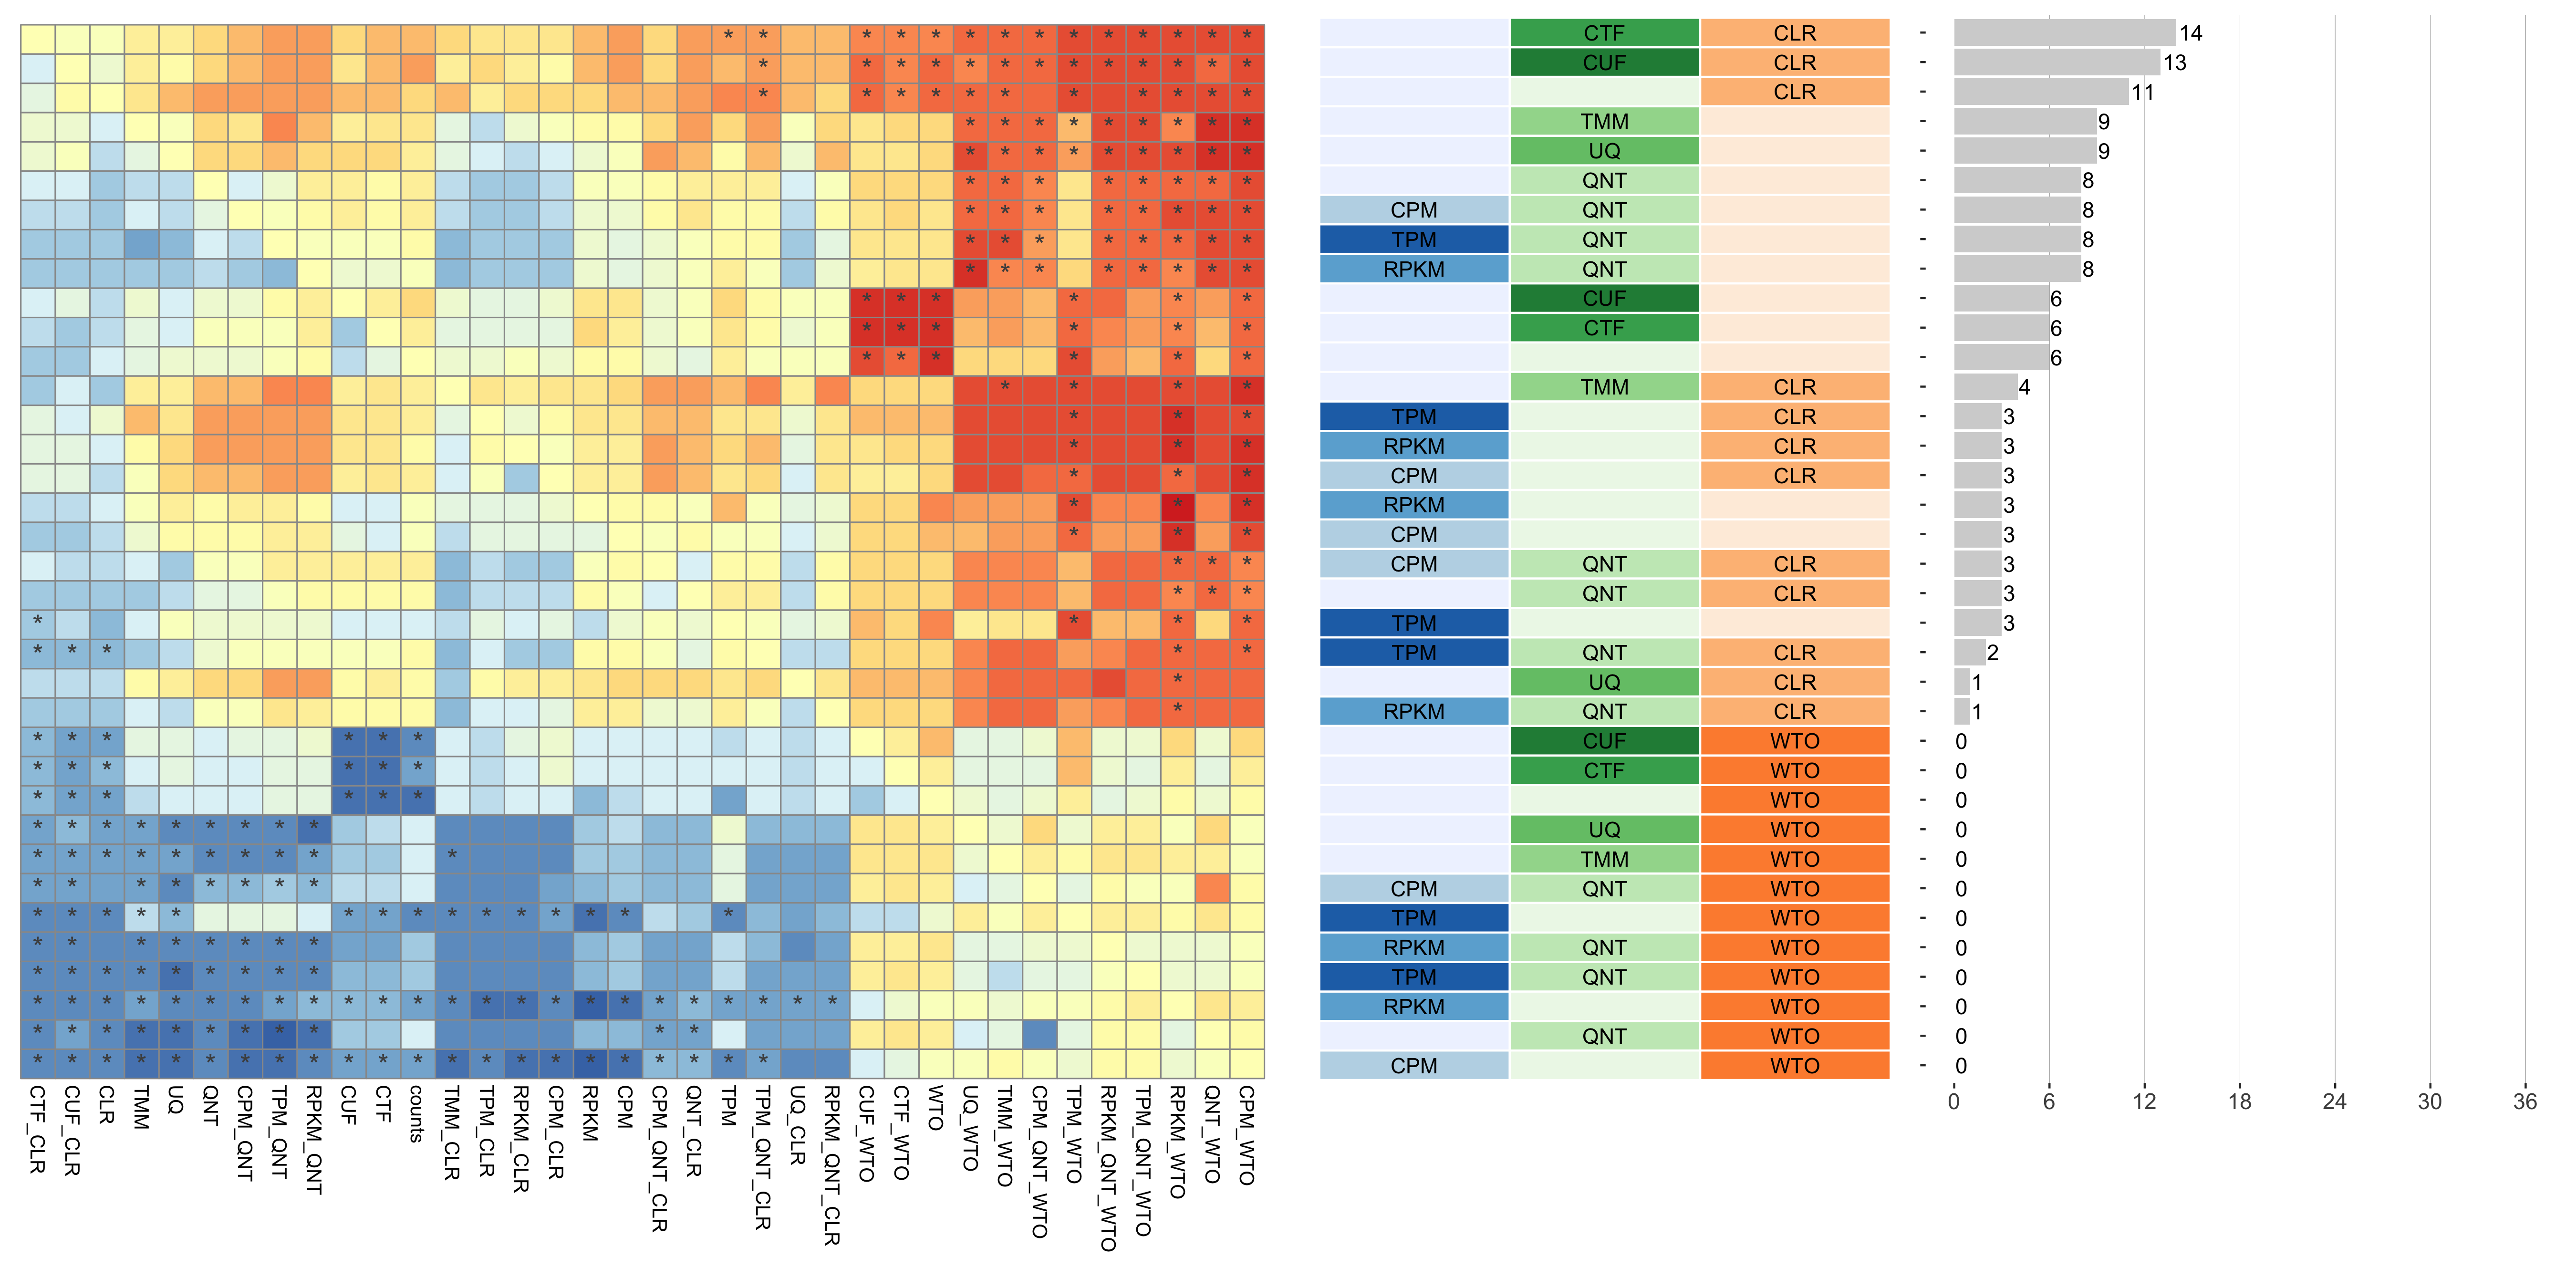 **Dataset-level pairwise comparison of workflow performance.** (**left**) The heatmap shows the relative performance of a pair of workflows, corresponding to a row and a column, directly compared to each other for the GTEx datasets based on the tissue-aware gold standard. The color in each cell (row, column) represents the proportion of datasets for which the workflow along the row has a higher log2(p20r/prior) than the workflow along the column. Comparisons that are statistically significant (corrected p < 0.01) based on a paired Wilcoxon test are marked with an asterisk. (**middle**) The workflows (rows) are described in terms of the specific method used in the within-sample normalization (blues), between-sample normalization (greens), and network transformation (oranges) stages. (**right**) The barplot shows the number of times each workflow was significantly greater than another workflow.